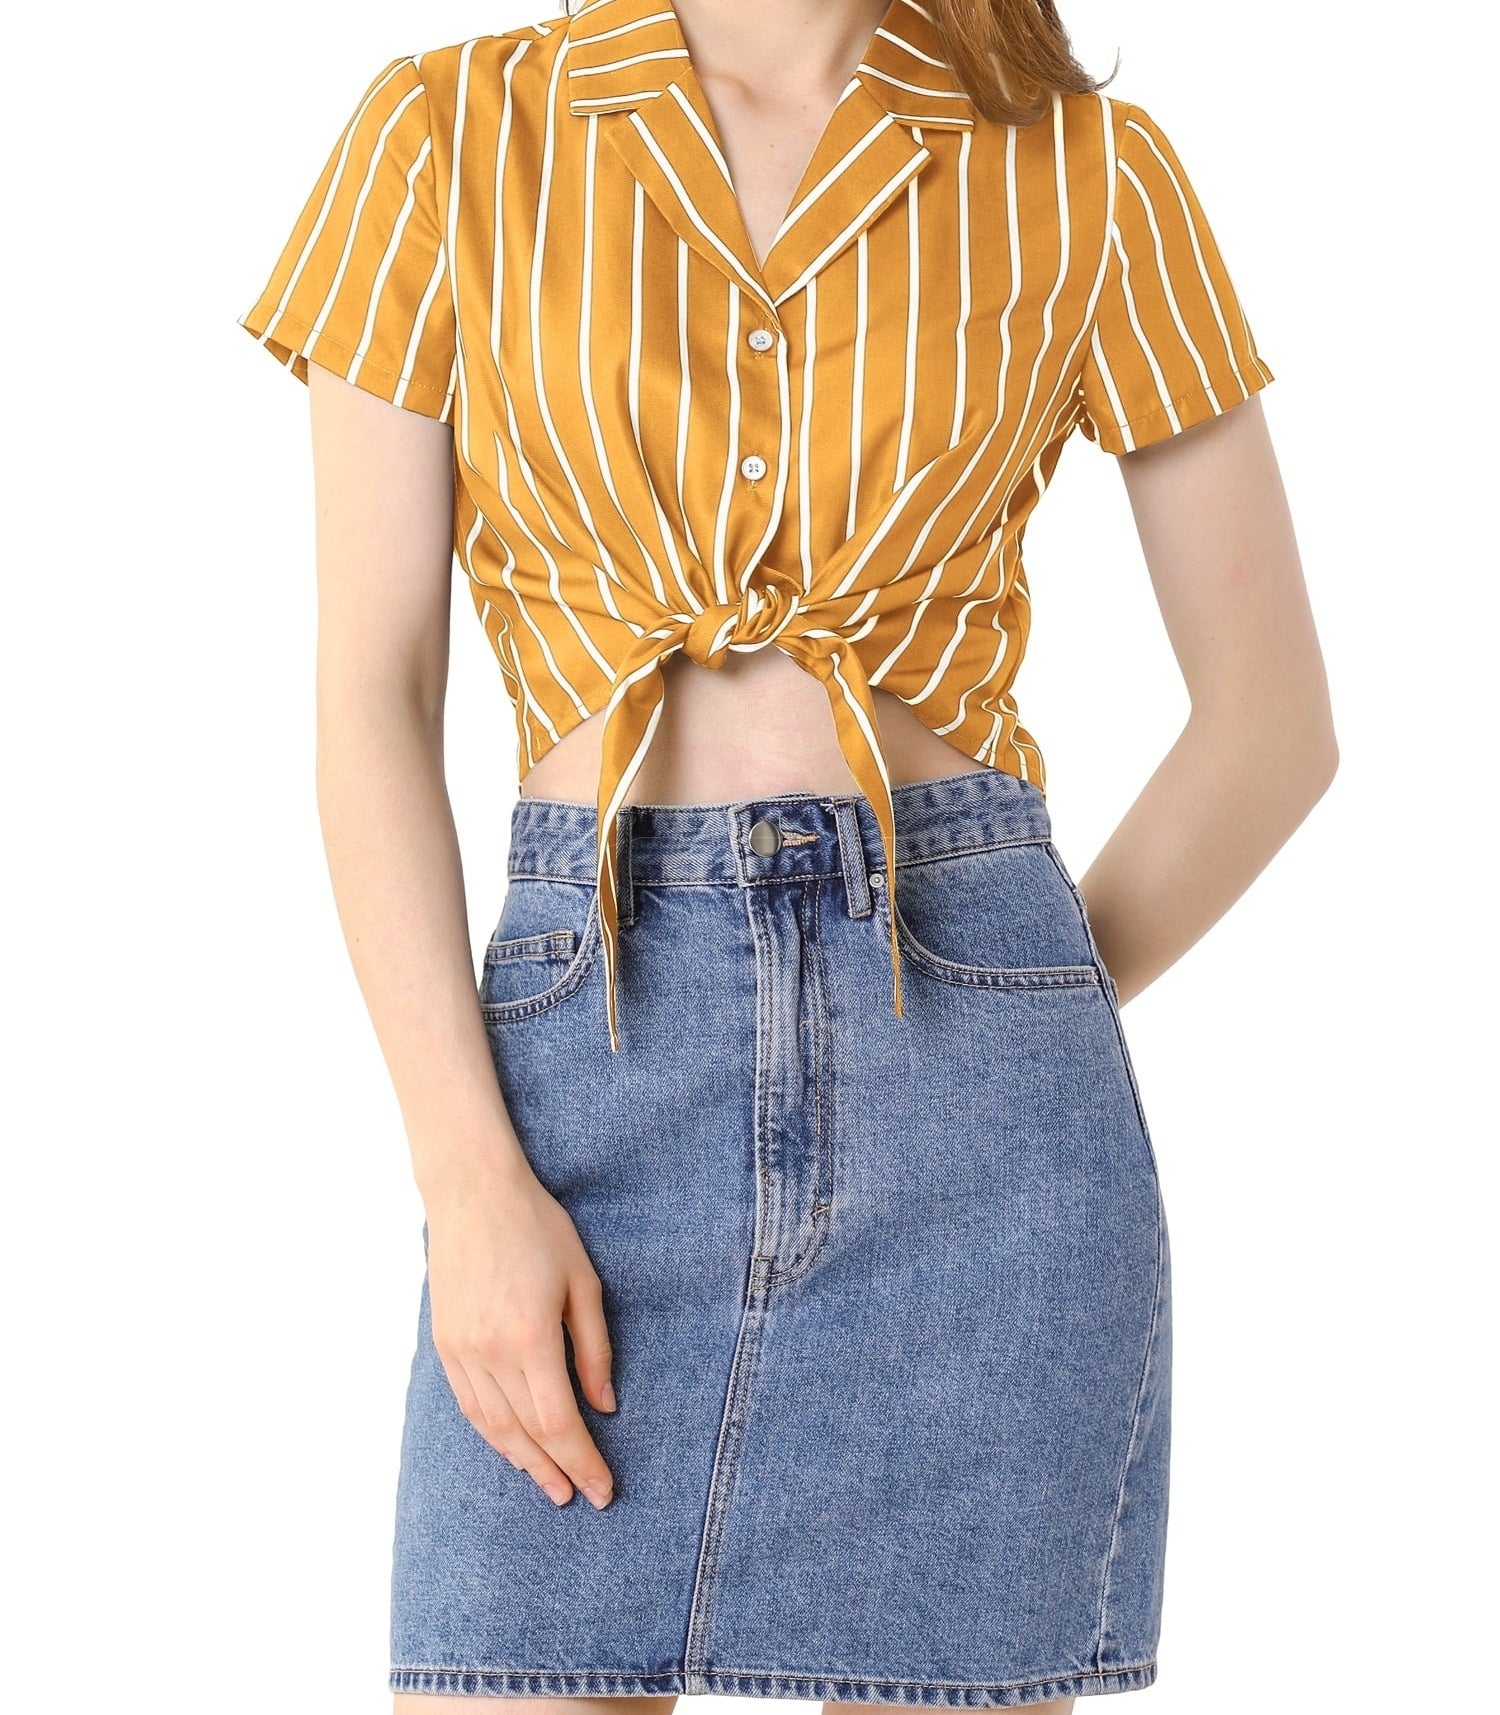 model in a striped tie-front yellow shirt with white stripes and a denim skirt